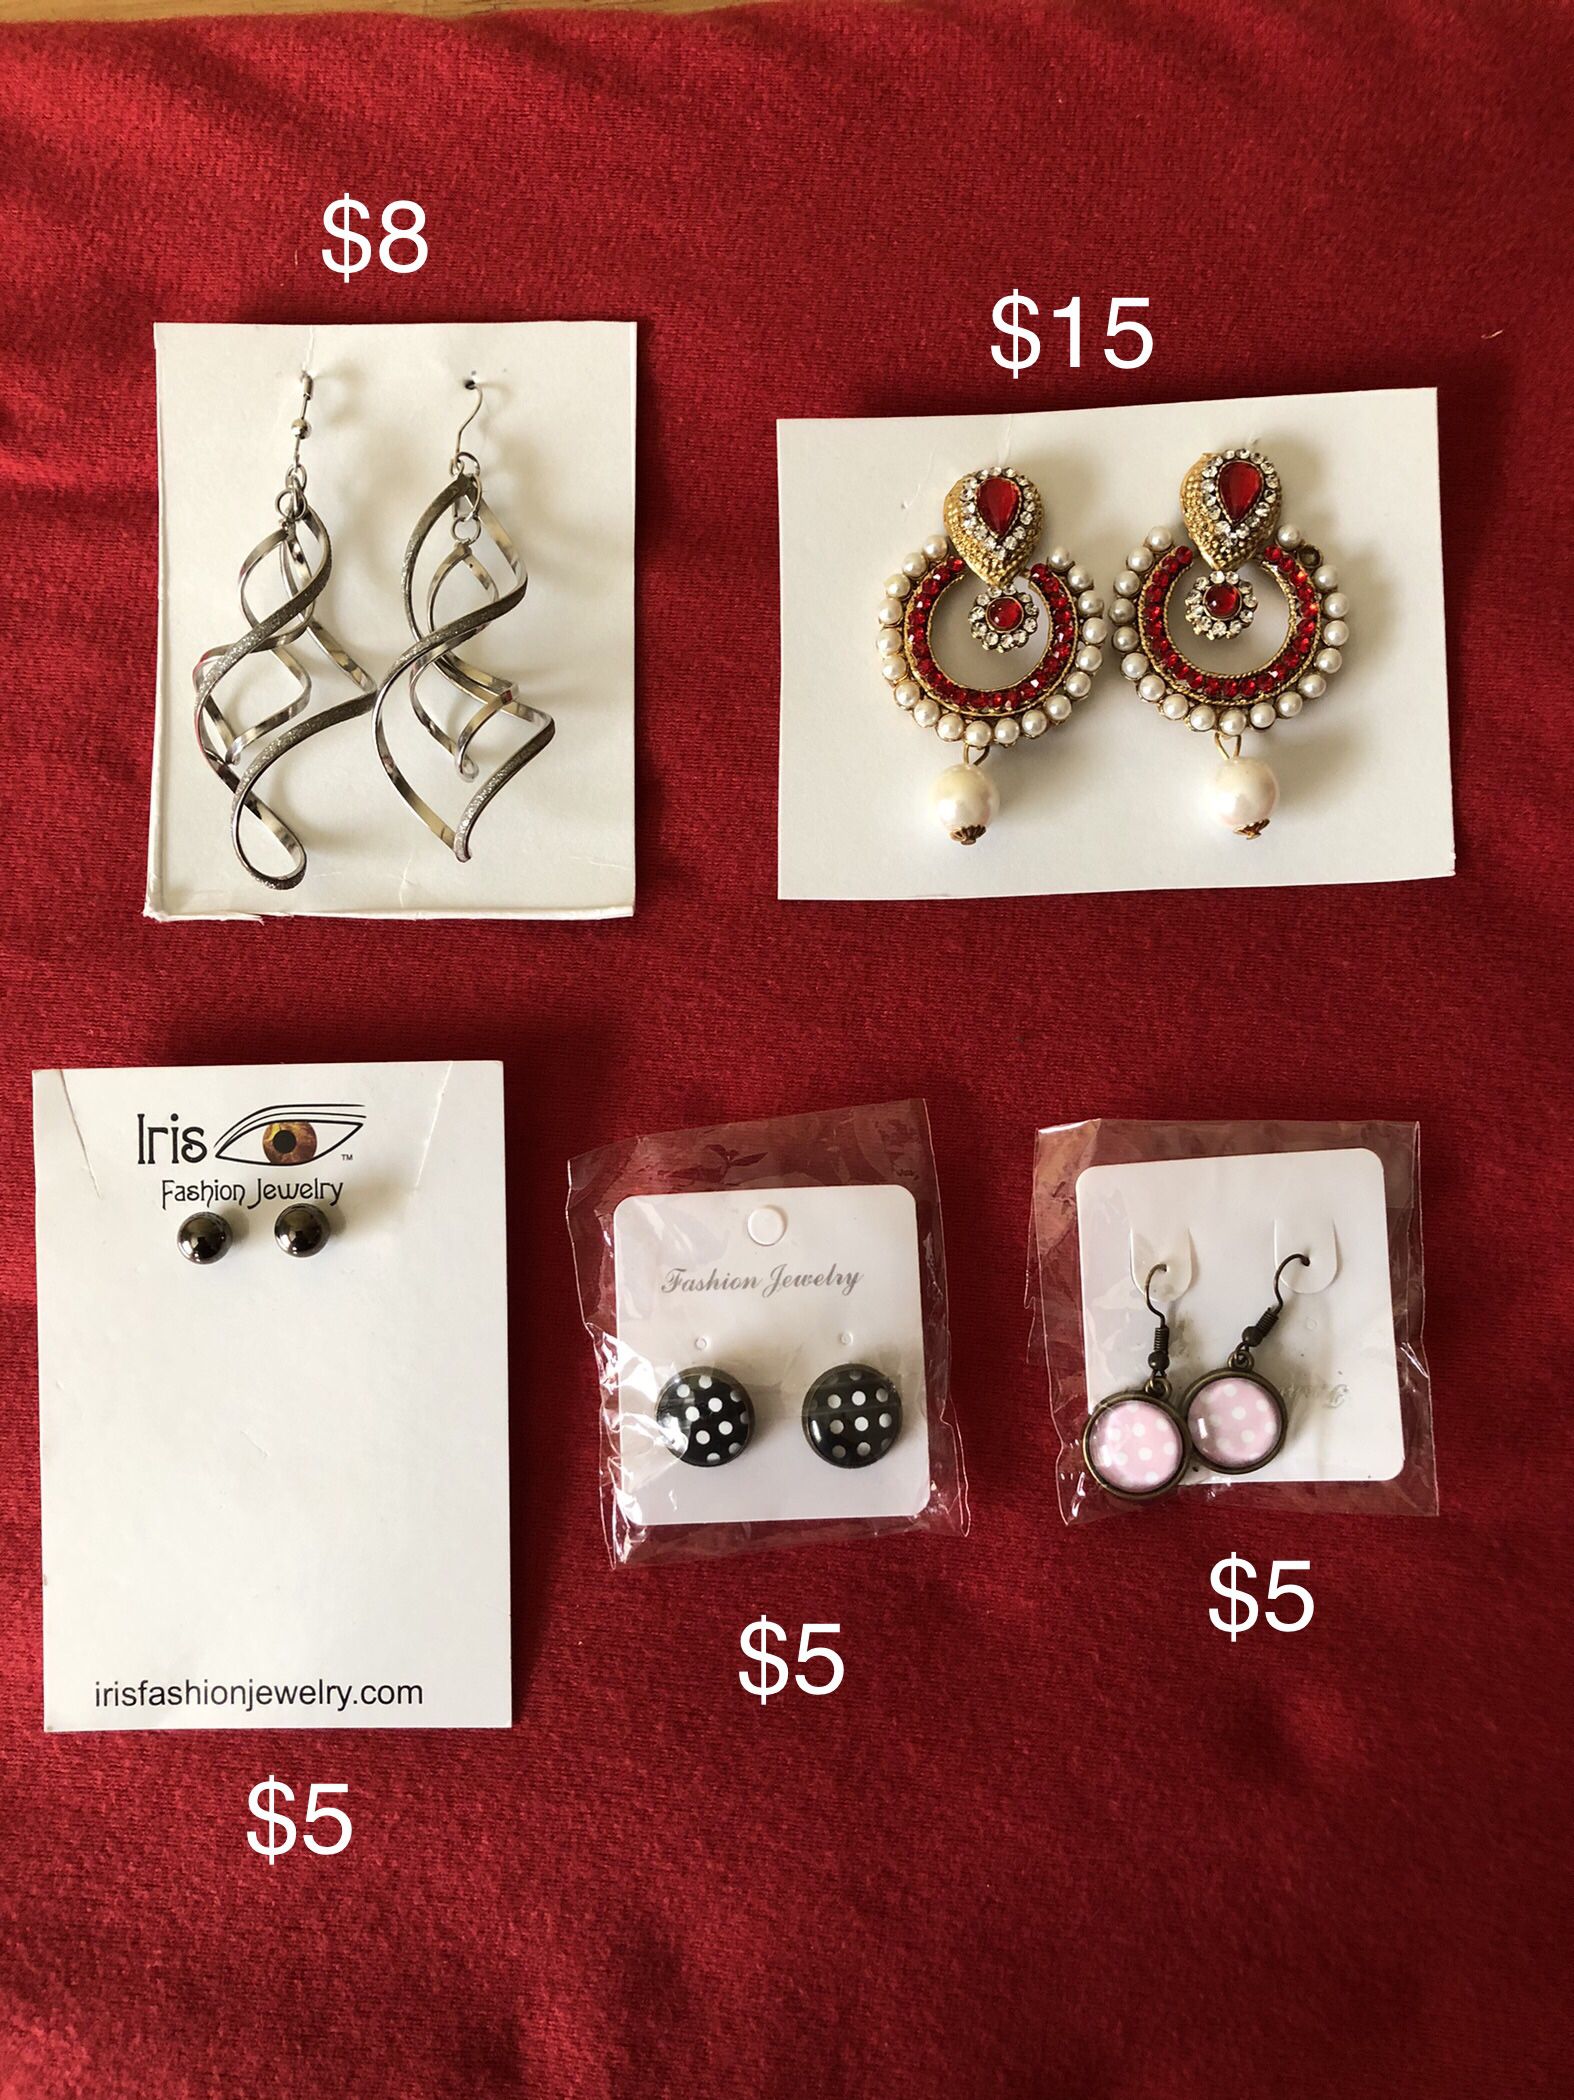 Earrings Priced Individually 